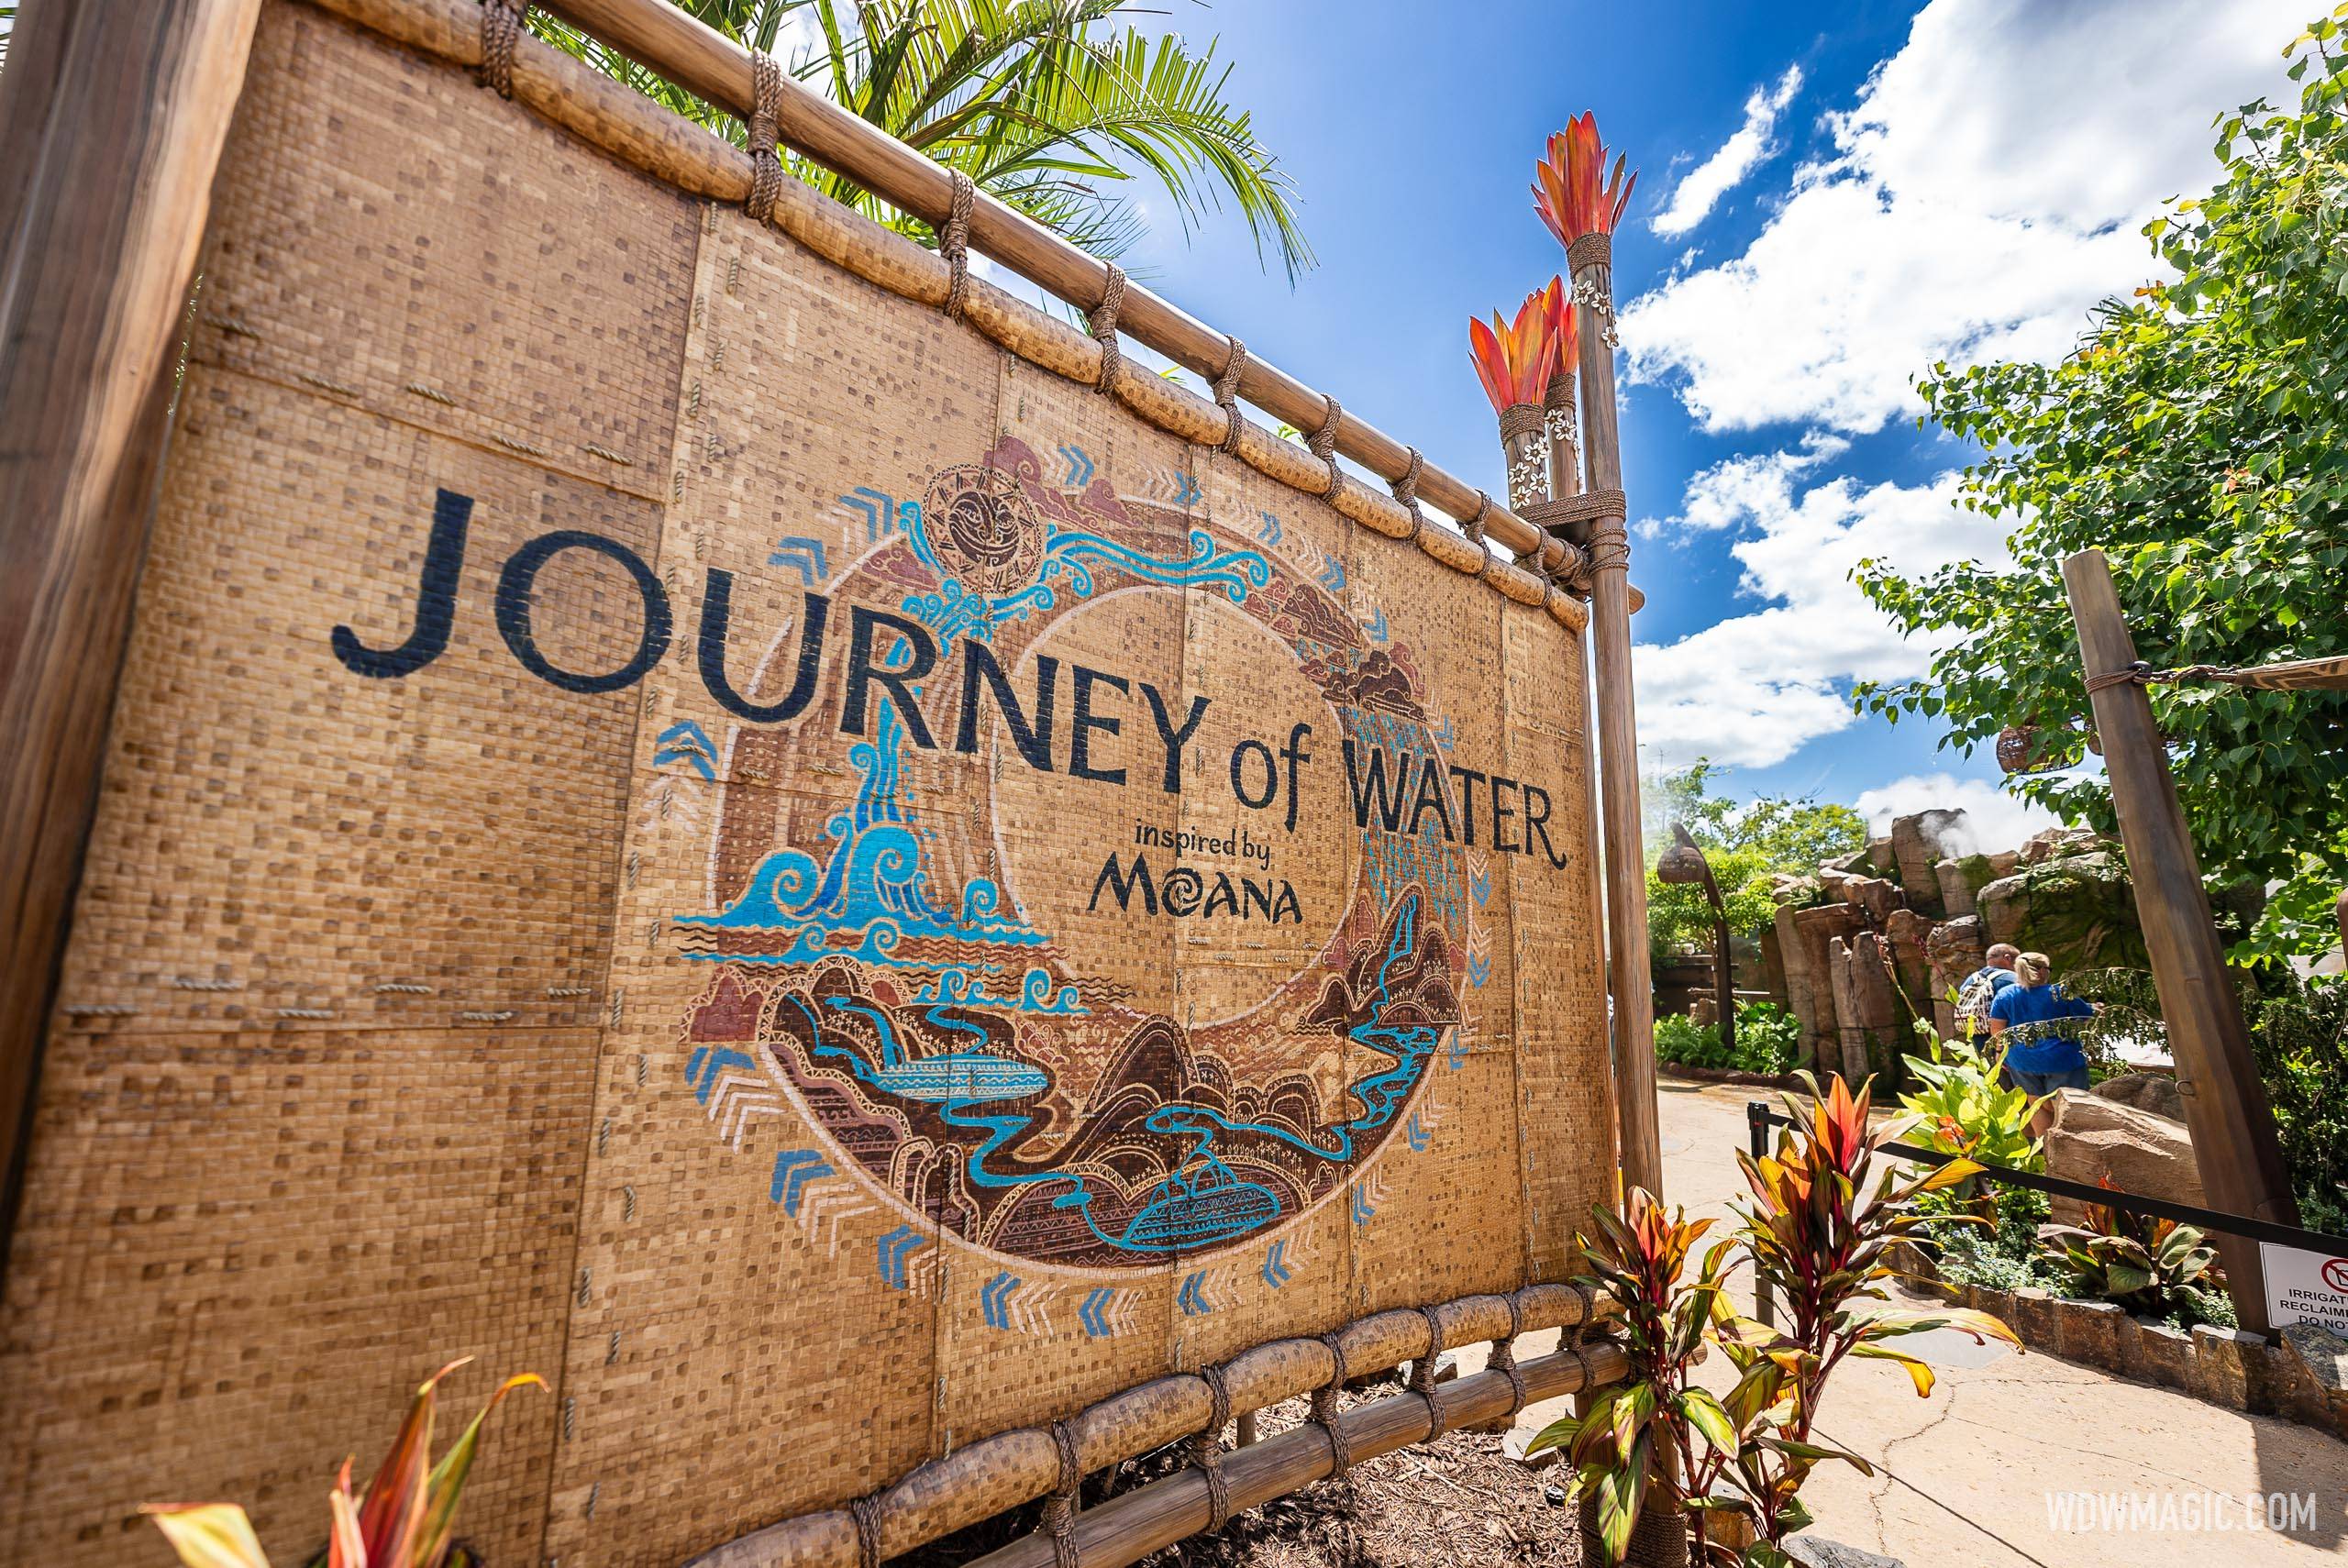 Journey of Water Inspired by Moana Virtual Queue reaches capacity on opening day